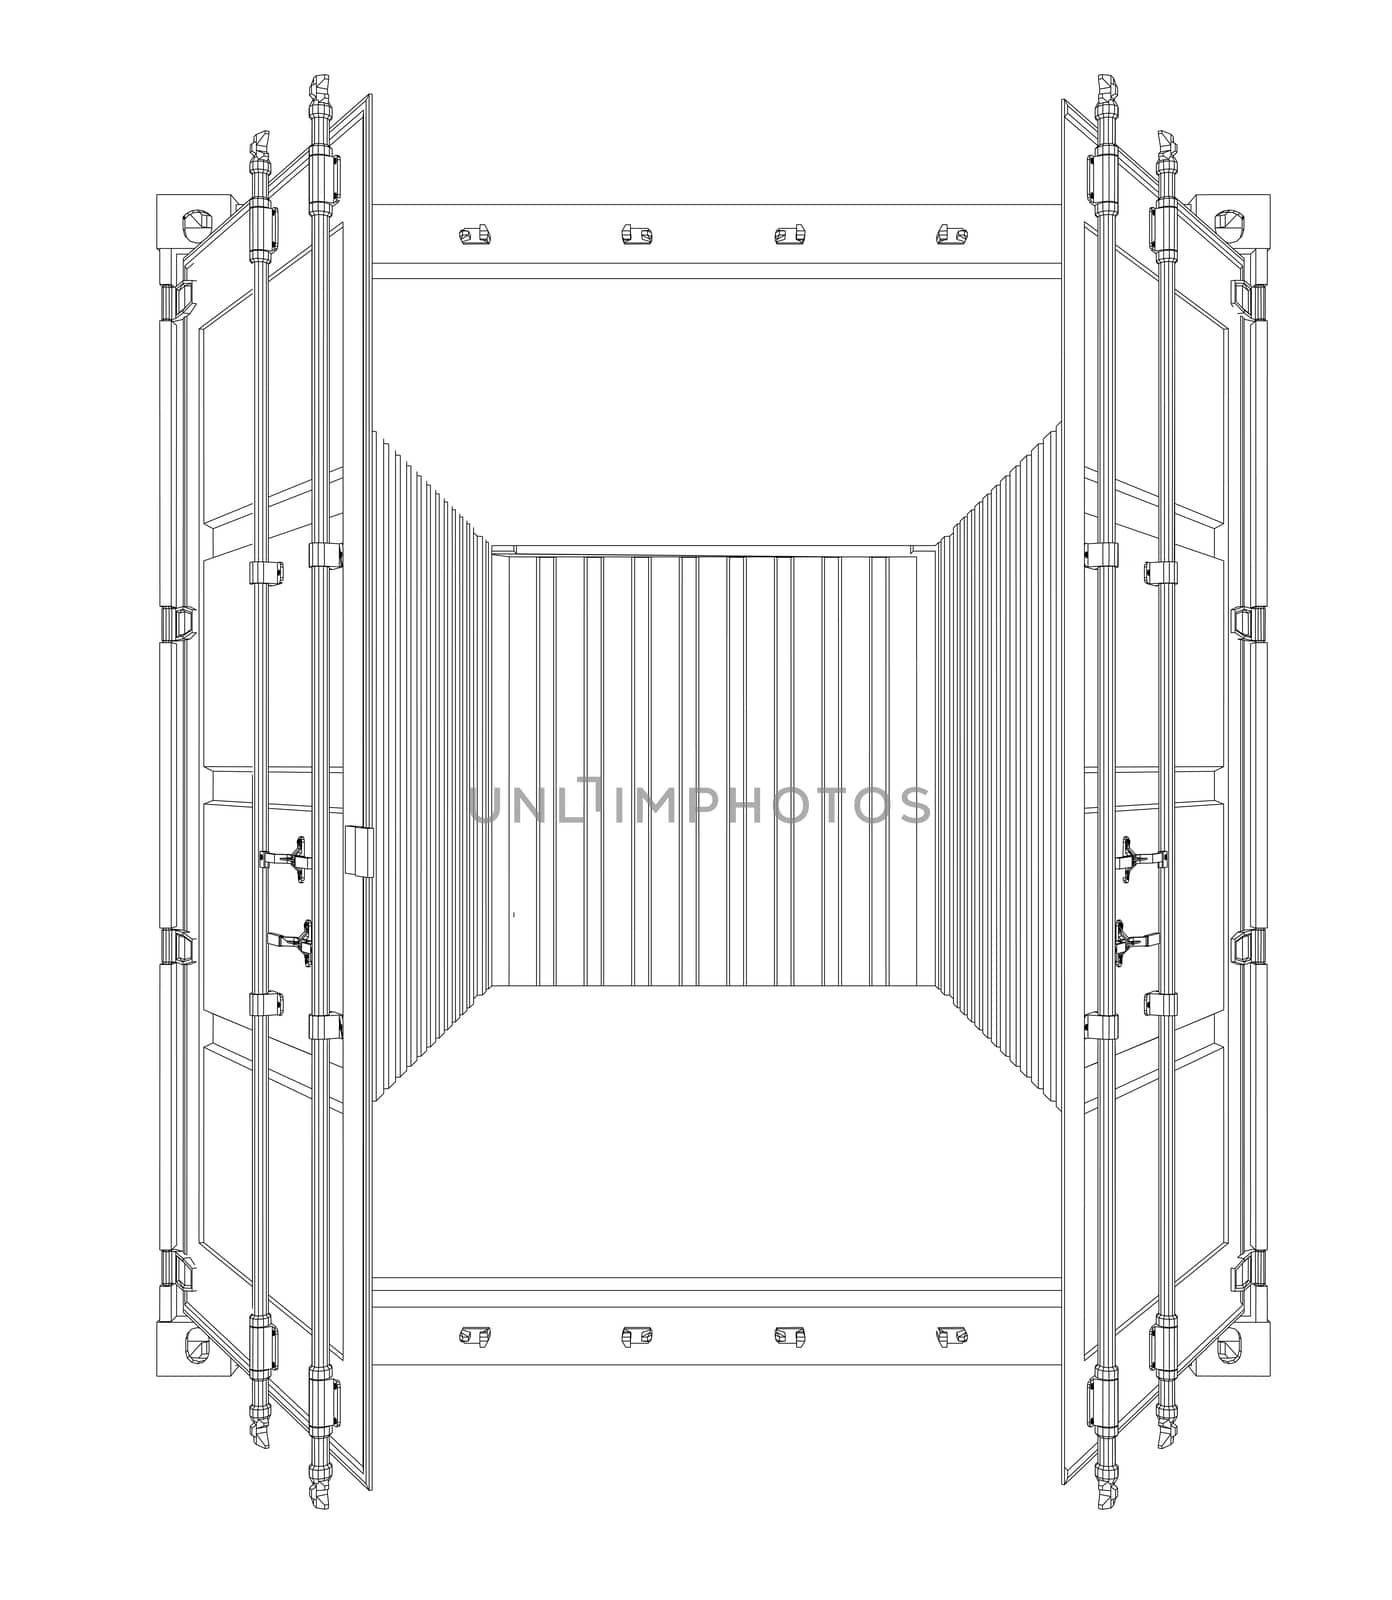 Open Empty Cargo Container. Wire-frame style. 3d illustration